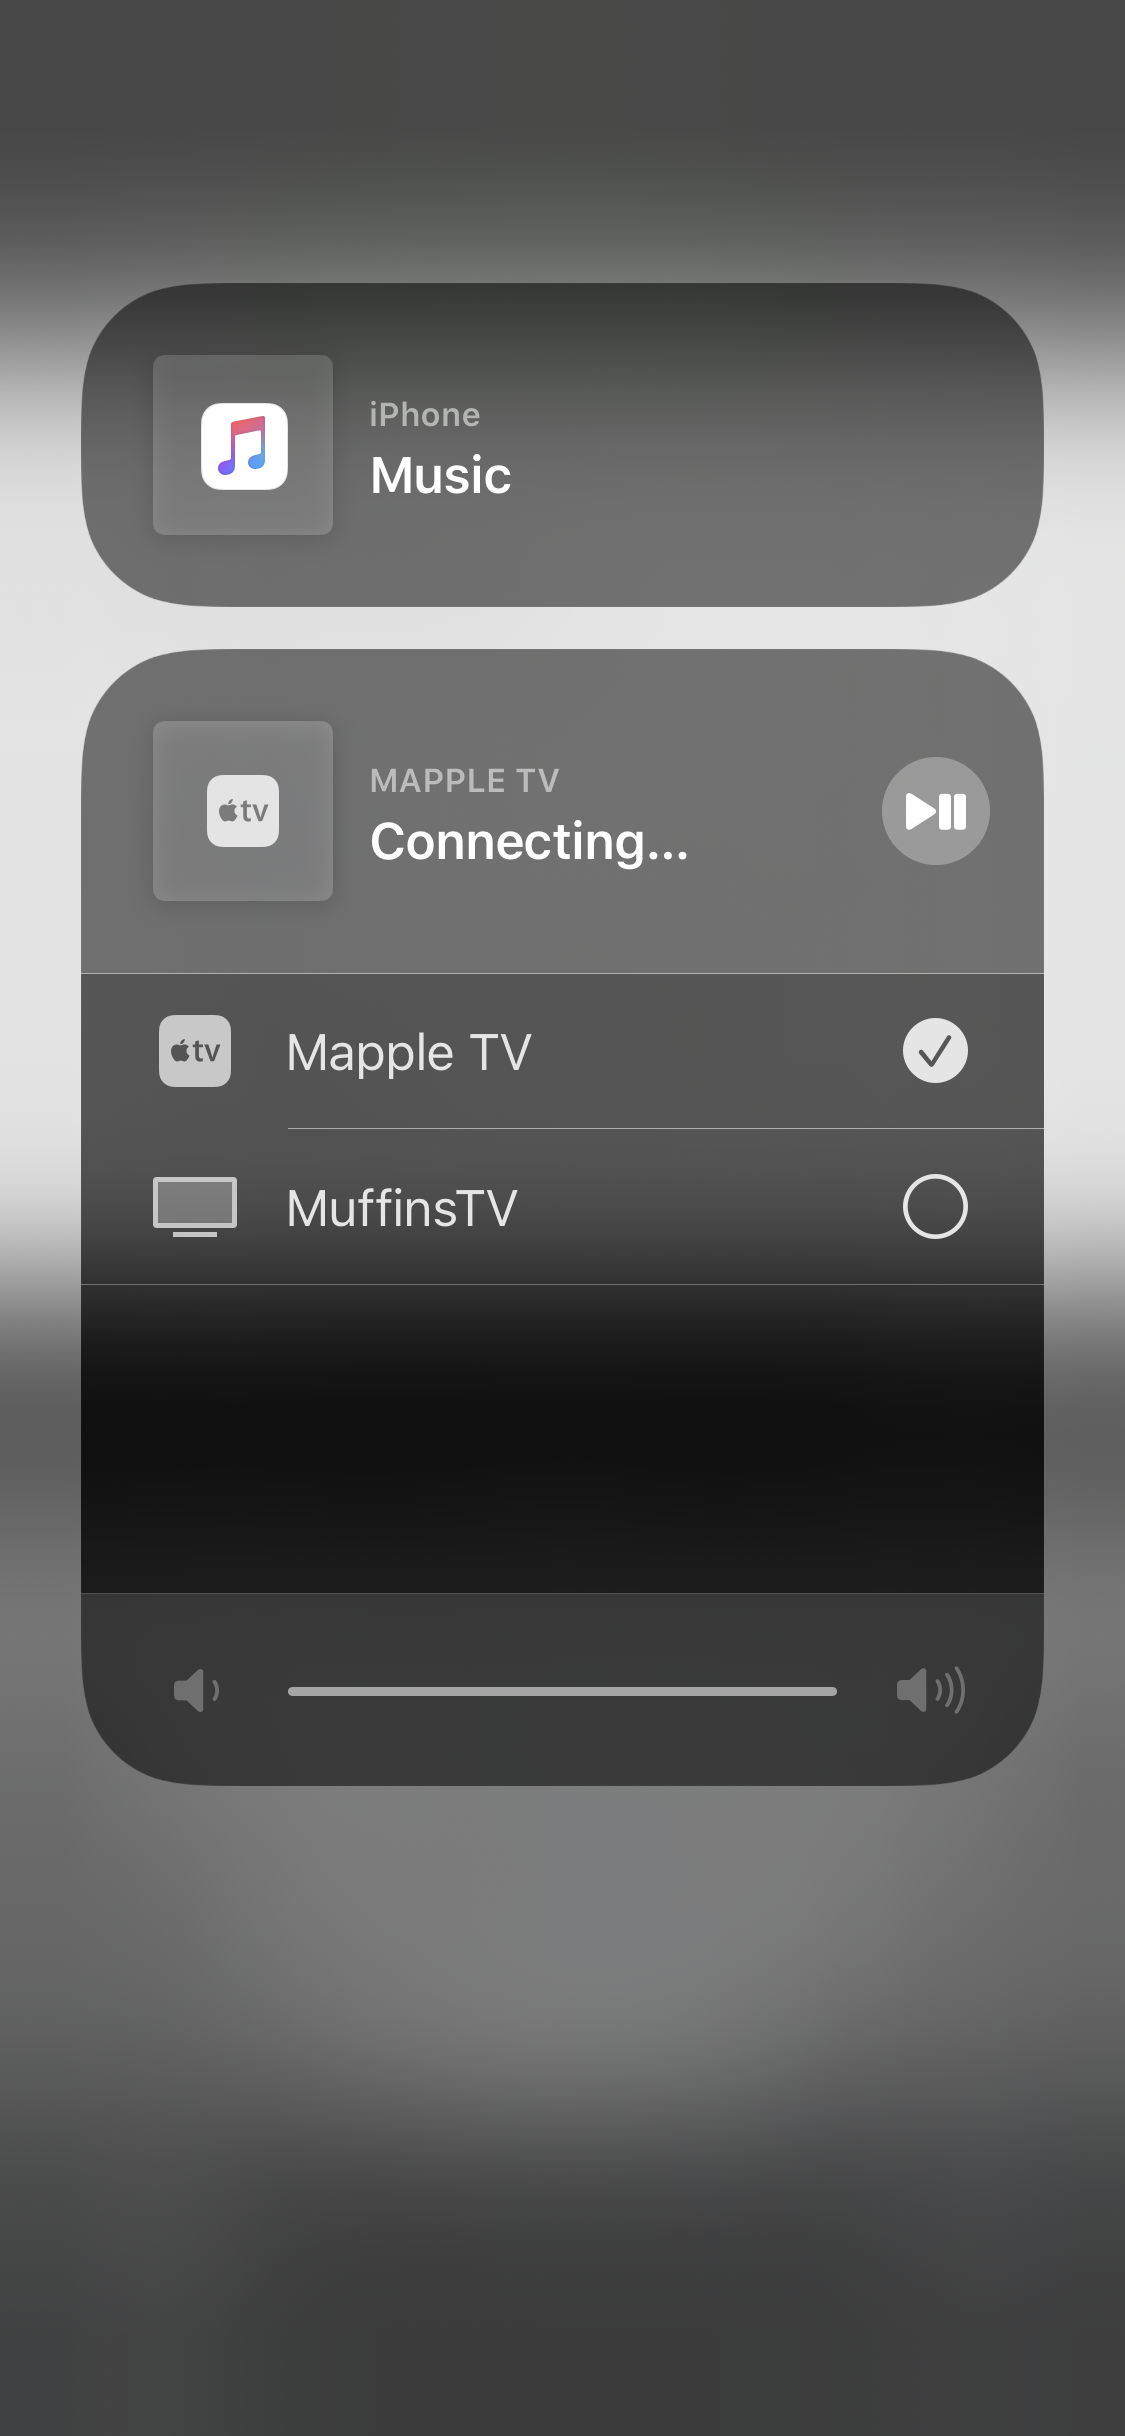 iPhone airplay and Apple TV remote contro… - Apple Community